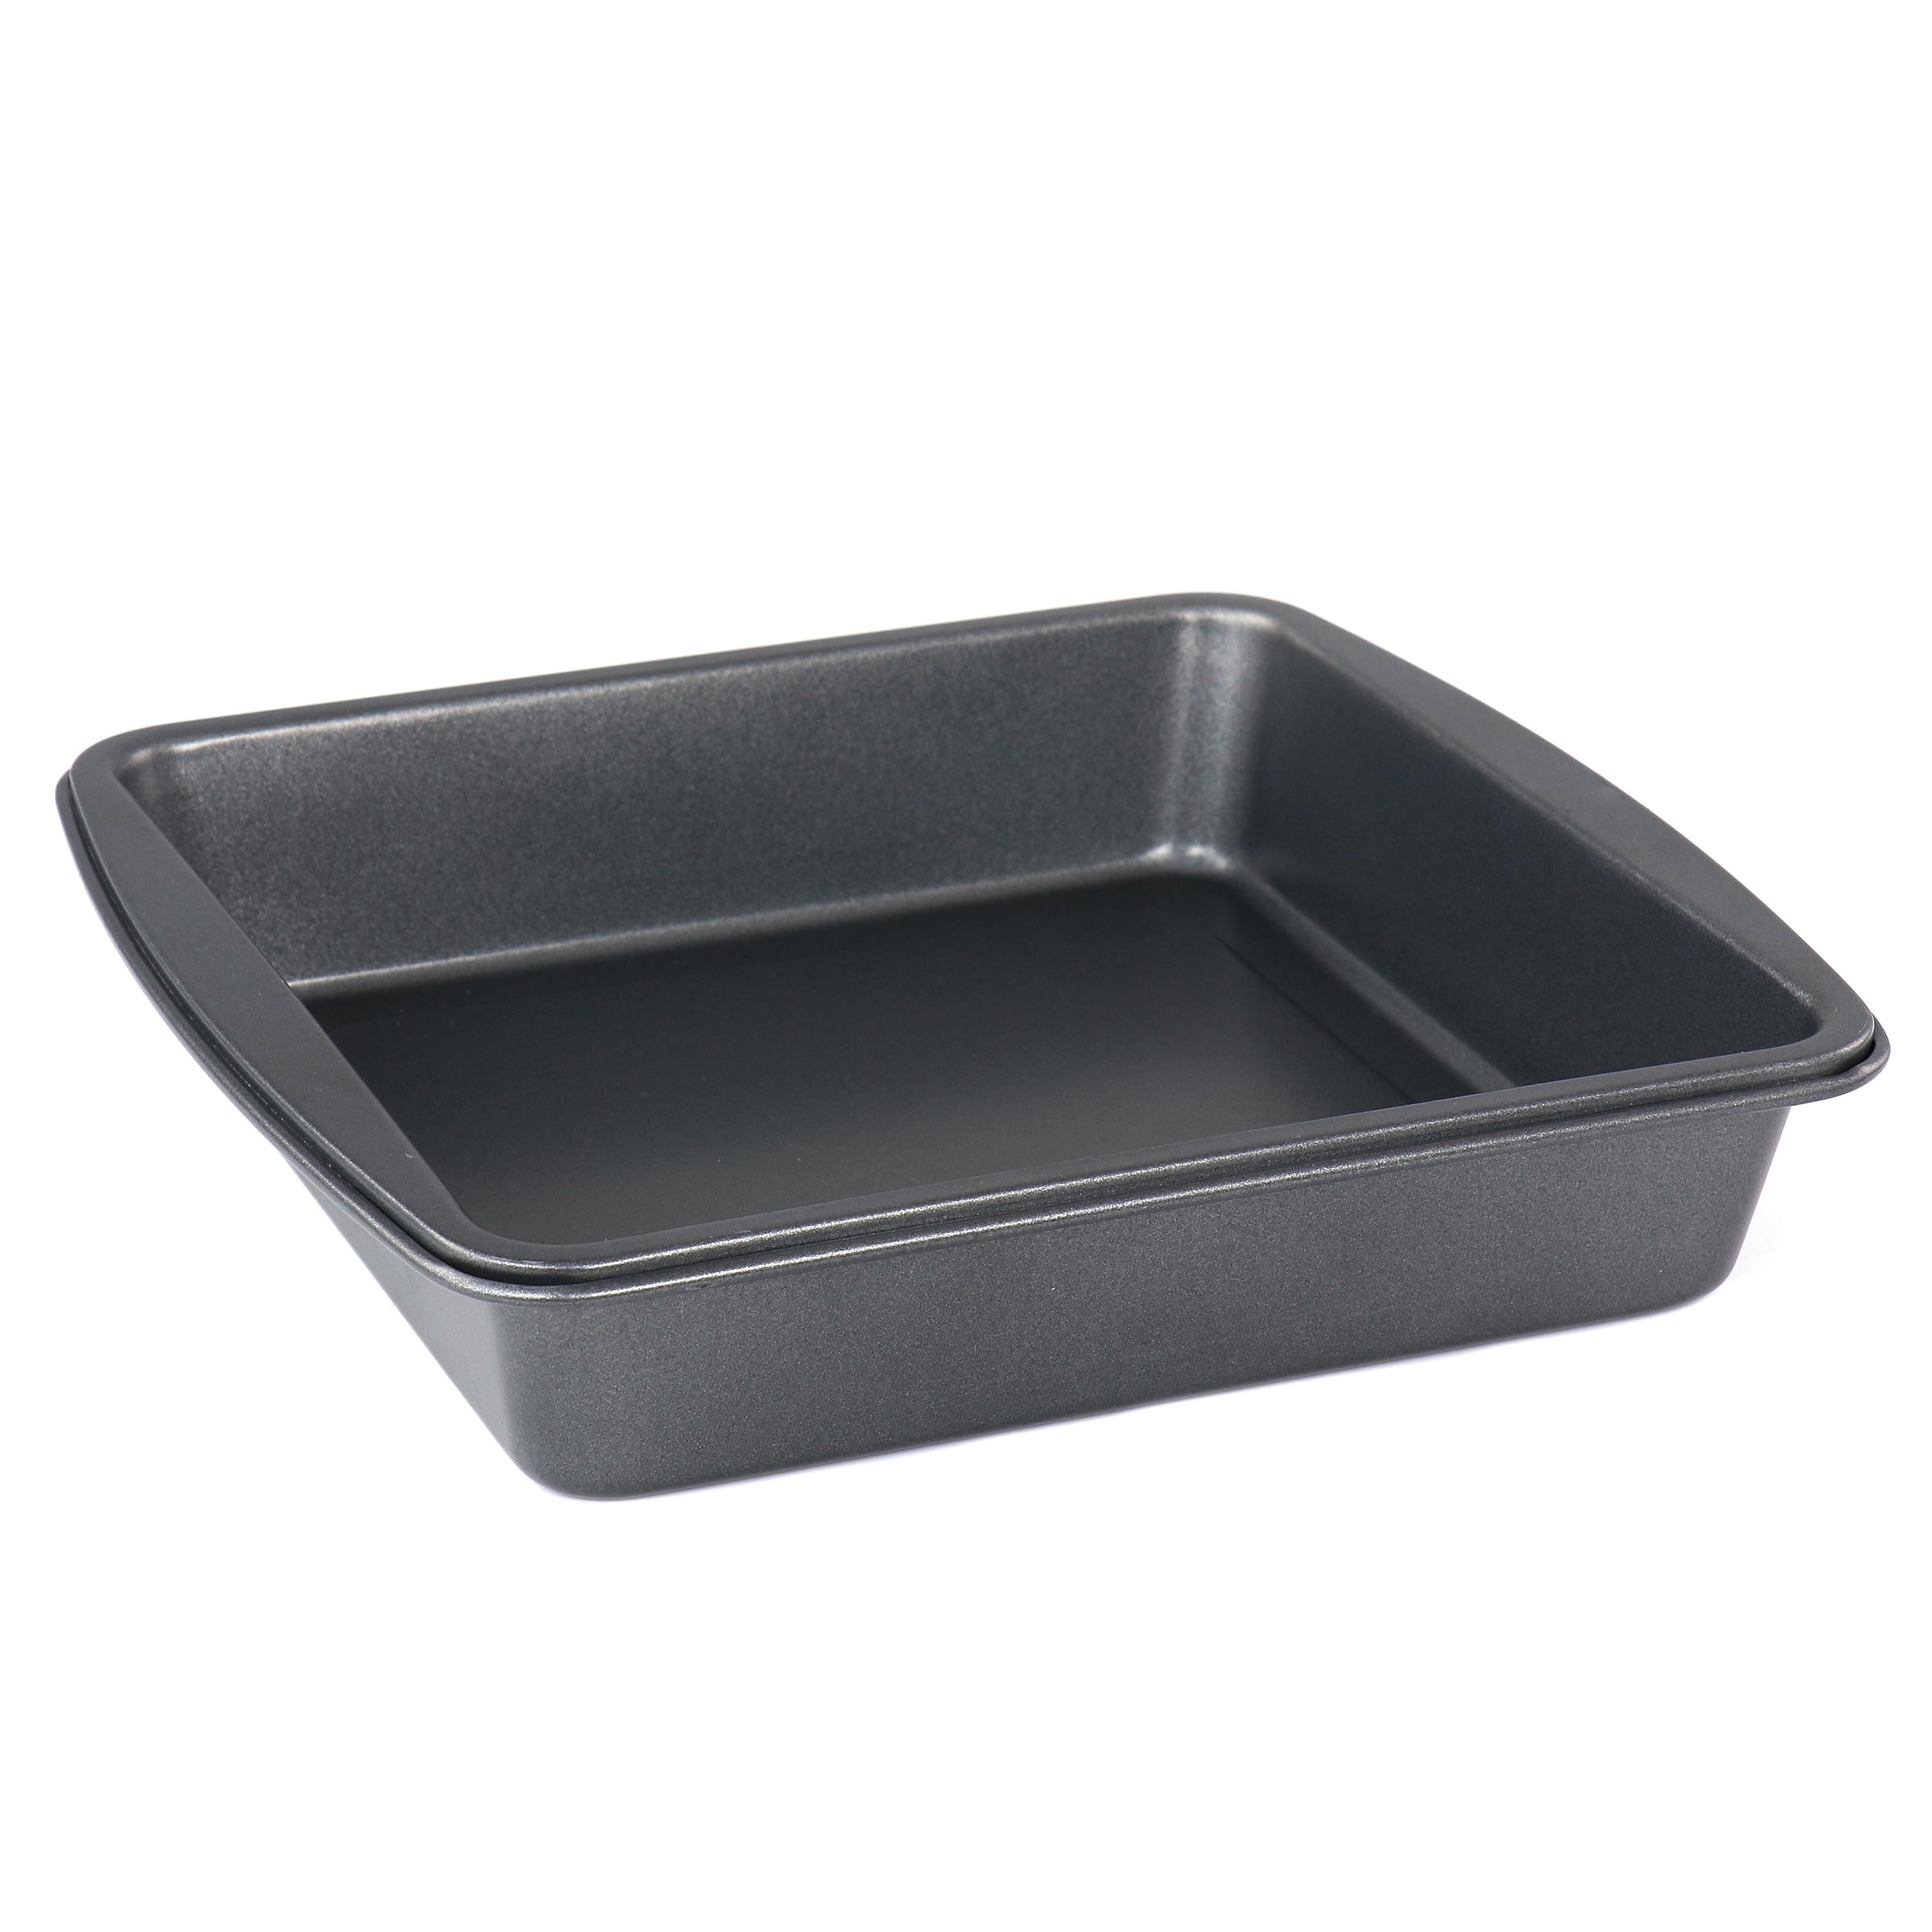 https://ak1.ostkcdn.com/images/products/is/images/direct/ff10bff7b97011b89e87650a1488658b7cdaf5b7/Simply-Essential-9-Inch-Nonstick-Aluminum-Cake-Pan.jpg